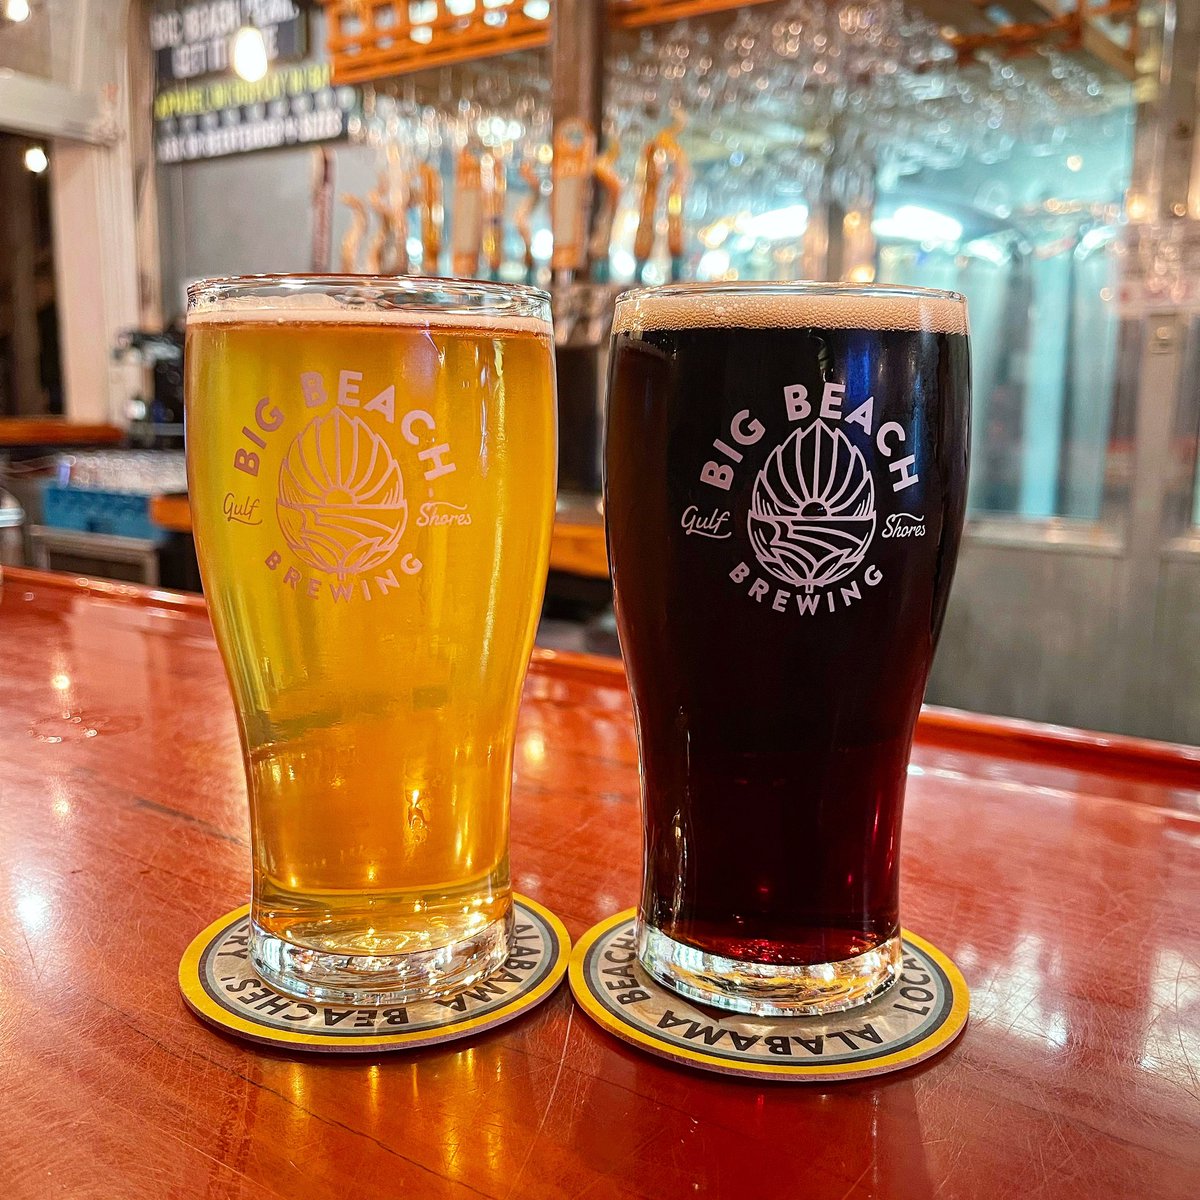 Local beers, local collabs at @bigbeachbrewing in @VisitALBeaches. Black Limelight Gose with Southern Chili Lab fermented black lime and Damn the Torpedos Oyster Stout with Admiral Shellfish Co oyster liquor. #visitalbeaches #albeachblogger